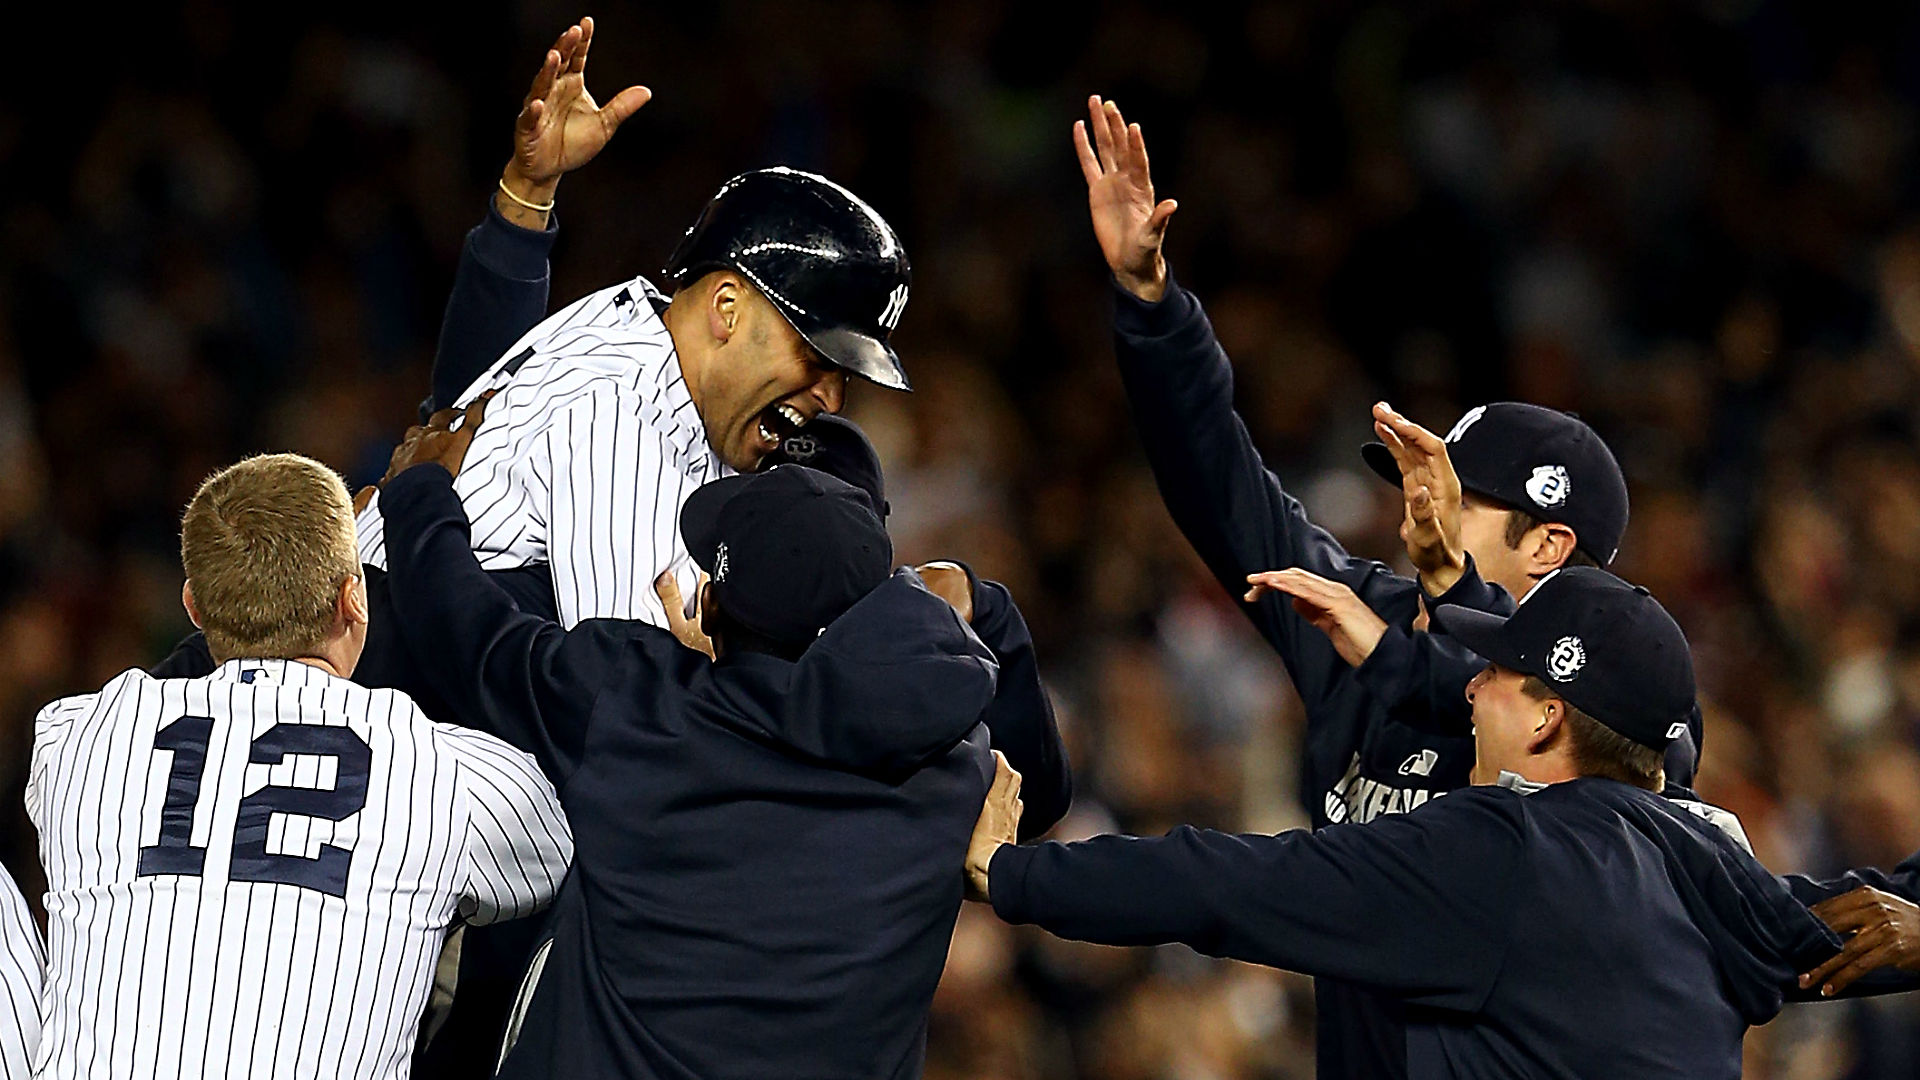 Jeter Leaves Bronx The Only Way He Knows How As A Winner Other